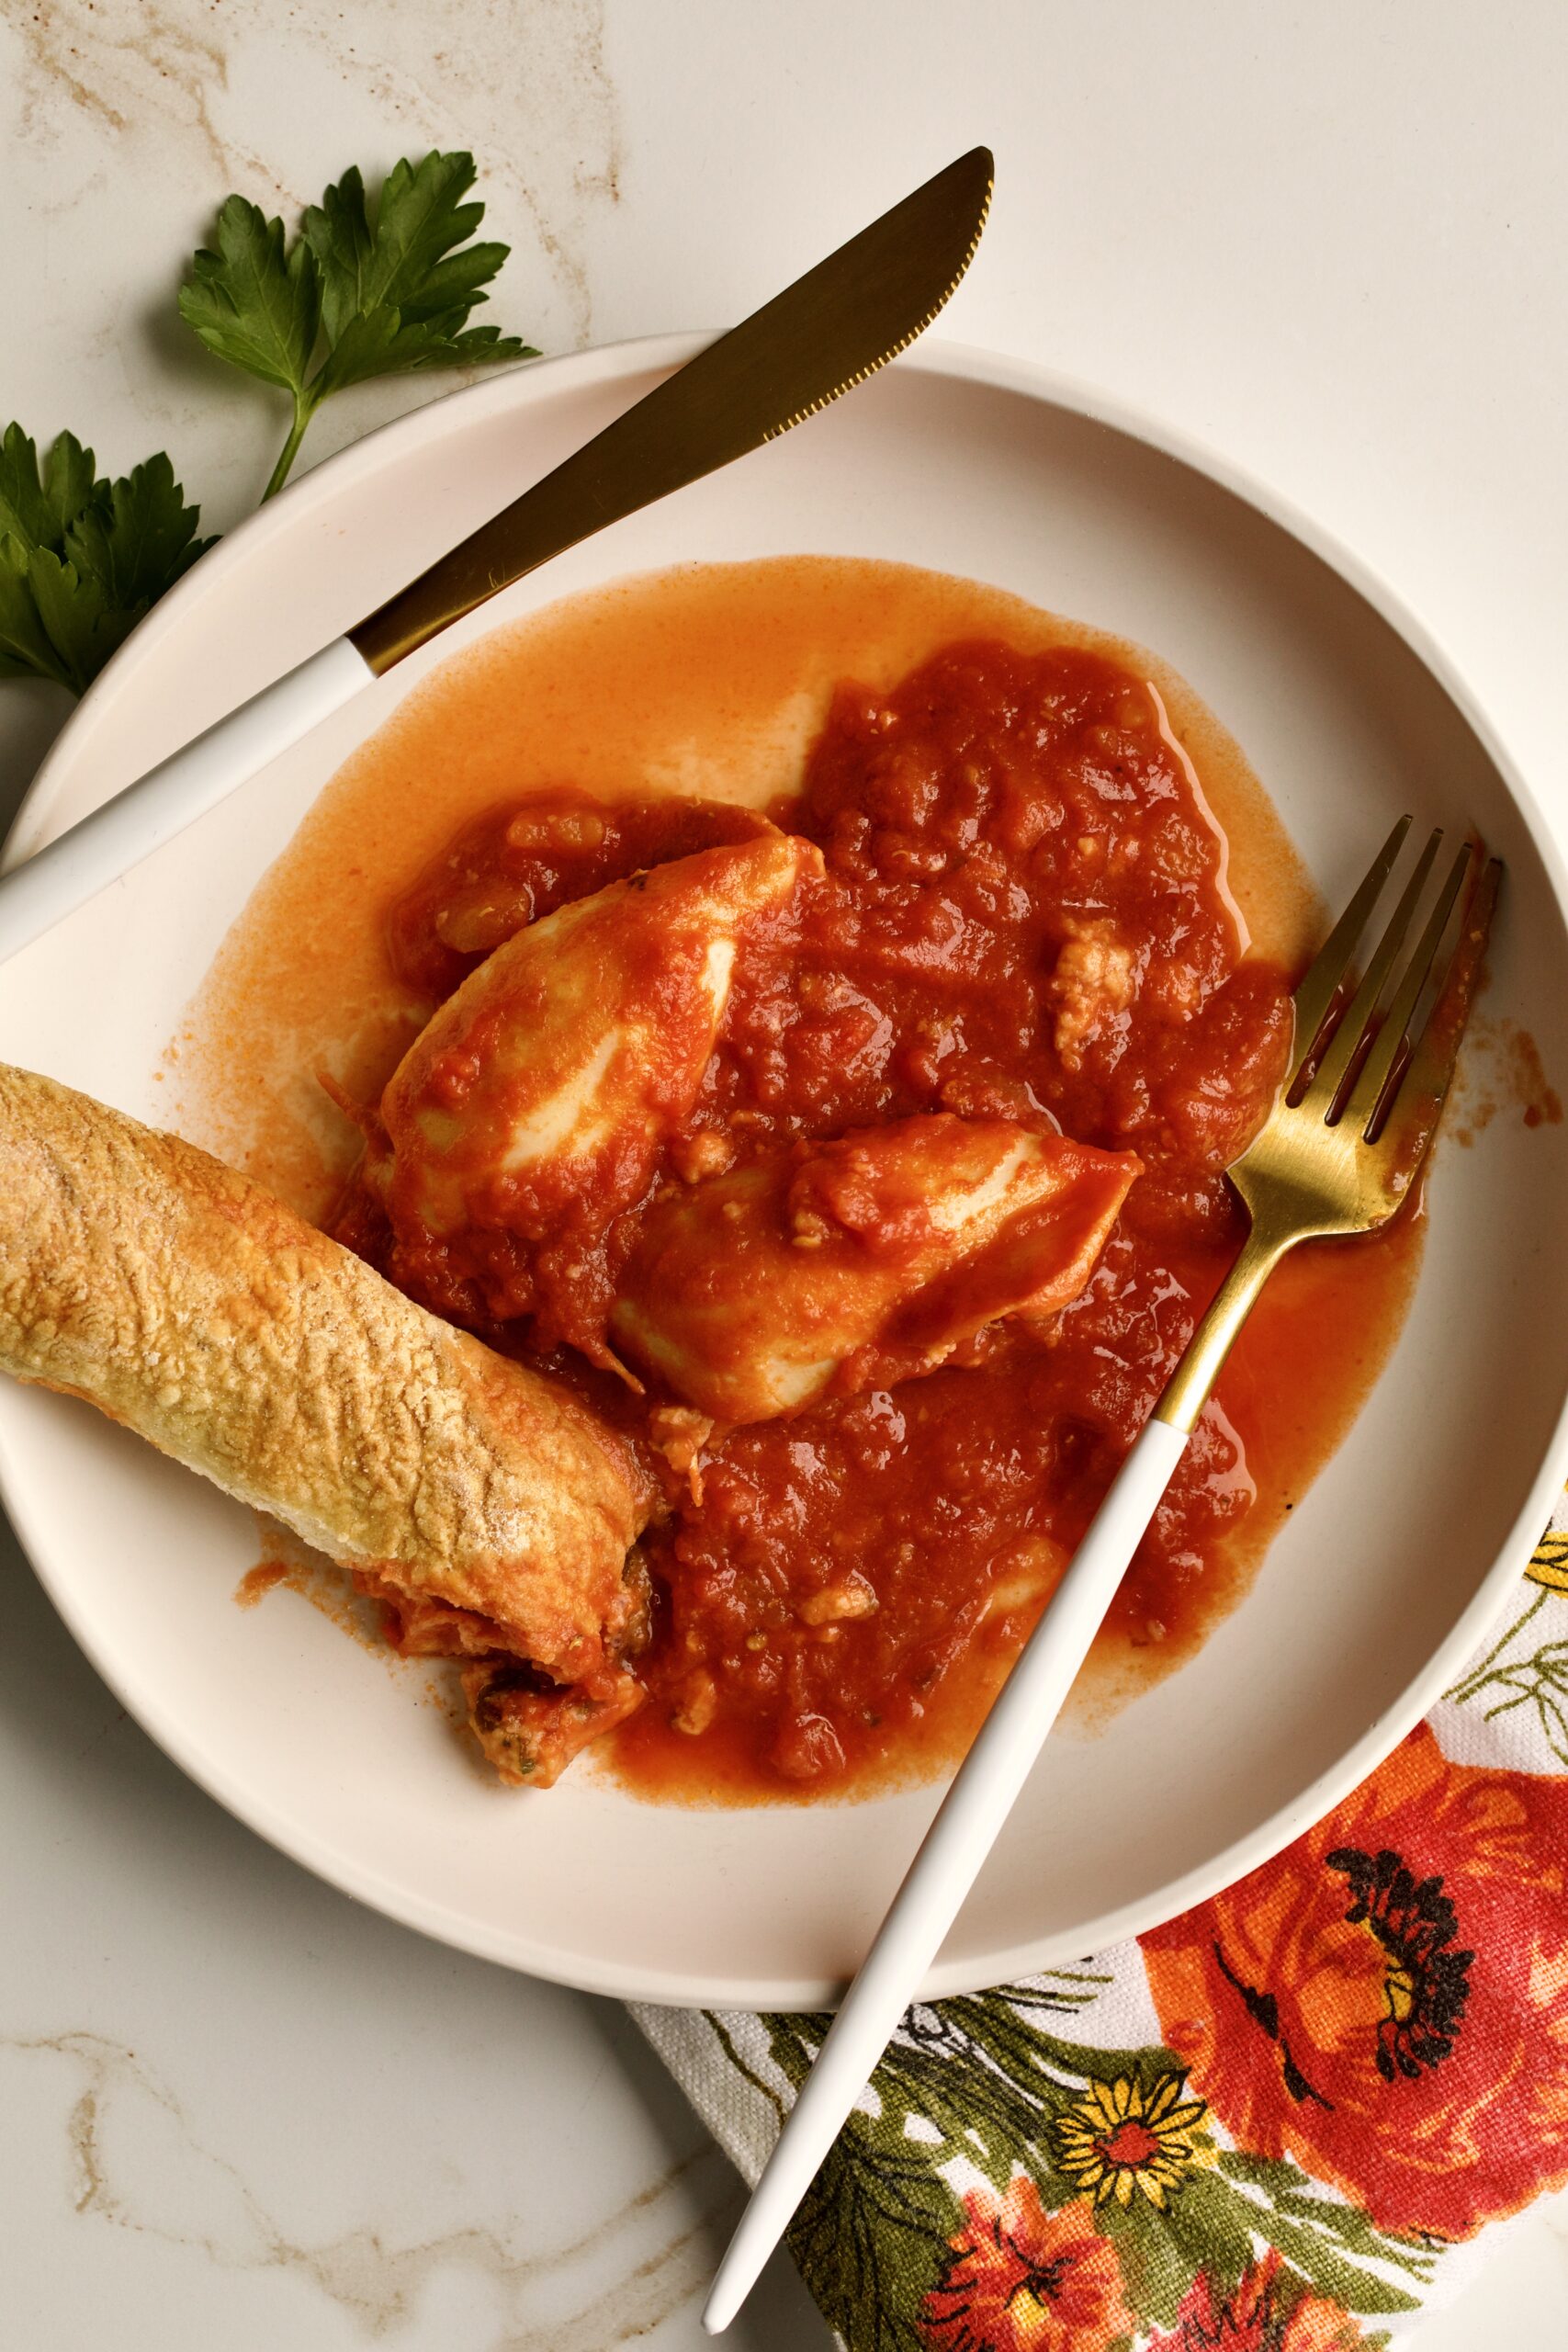 stuffed calamari with tomato sauce served in a plate with crusty bread